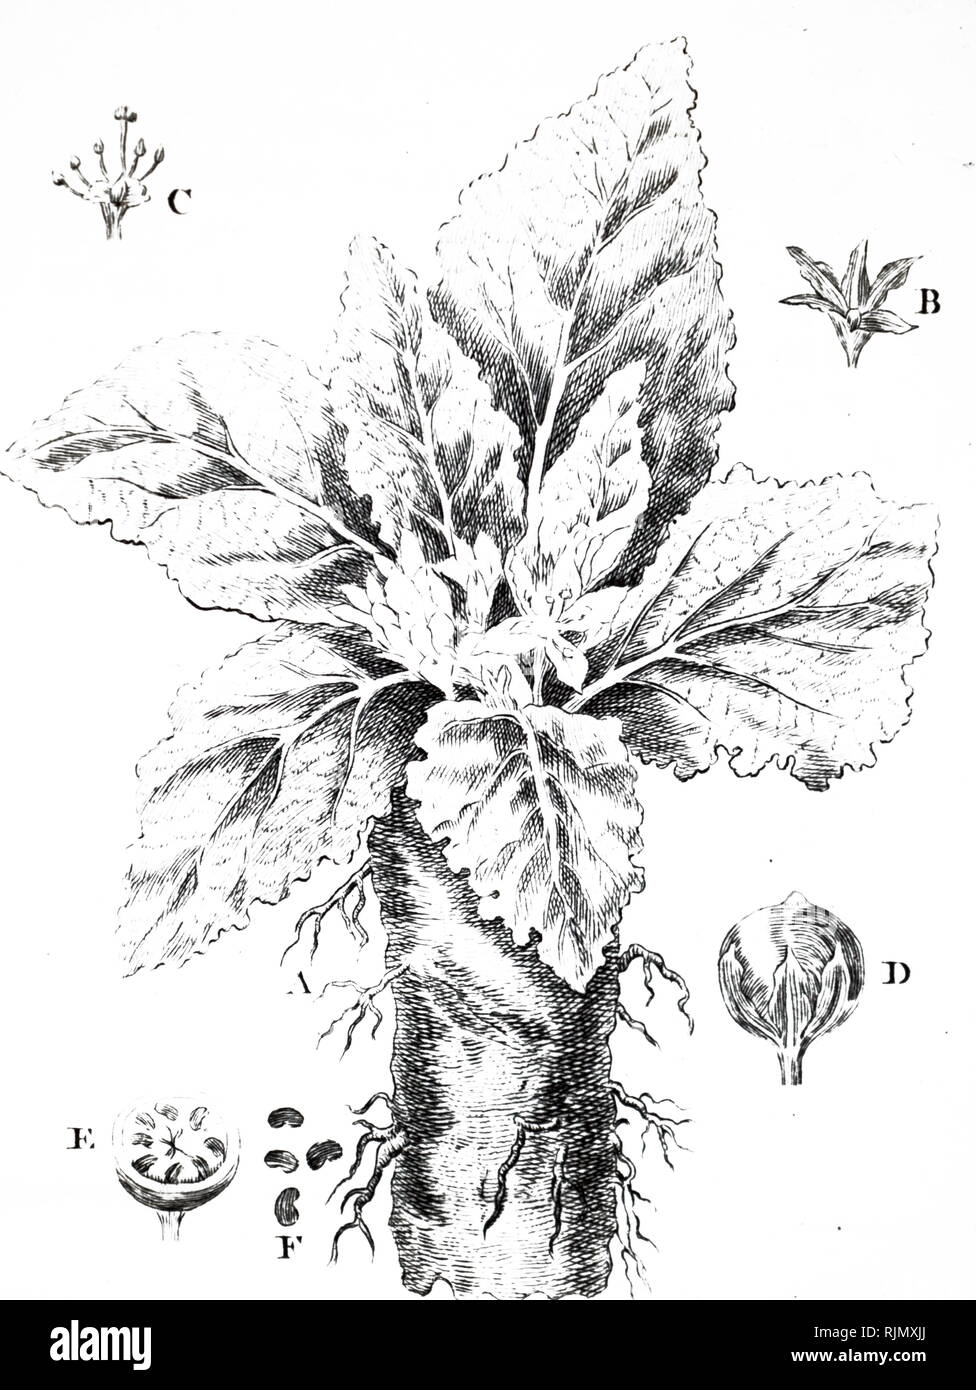 An engraving depicting MANDRAKE. From Francois Rozier Course Complete d'Agriculture, Paris, 1793. A mandrake is the root of a plant, historically derived either from plants of the genus Mandragora found in the Mediterranean region, or from other species, such as Byronia alba, the English mandrake, which have similar properties. Because mandrakes contain deliriant hallucinogenic tropane alkaloids and the shape of their roots often resembles human figures, they have been associated with a variety of superstitious practices throughout history. Stock Photo